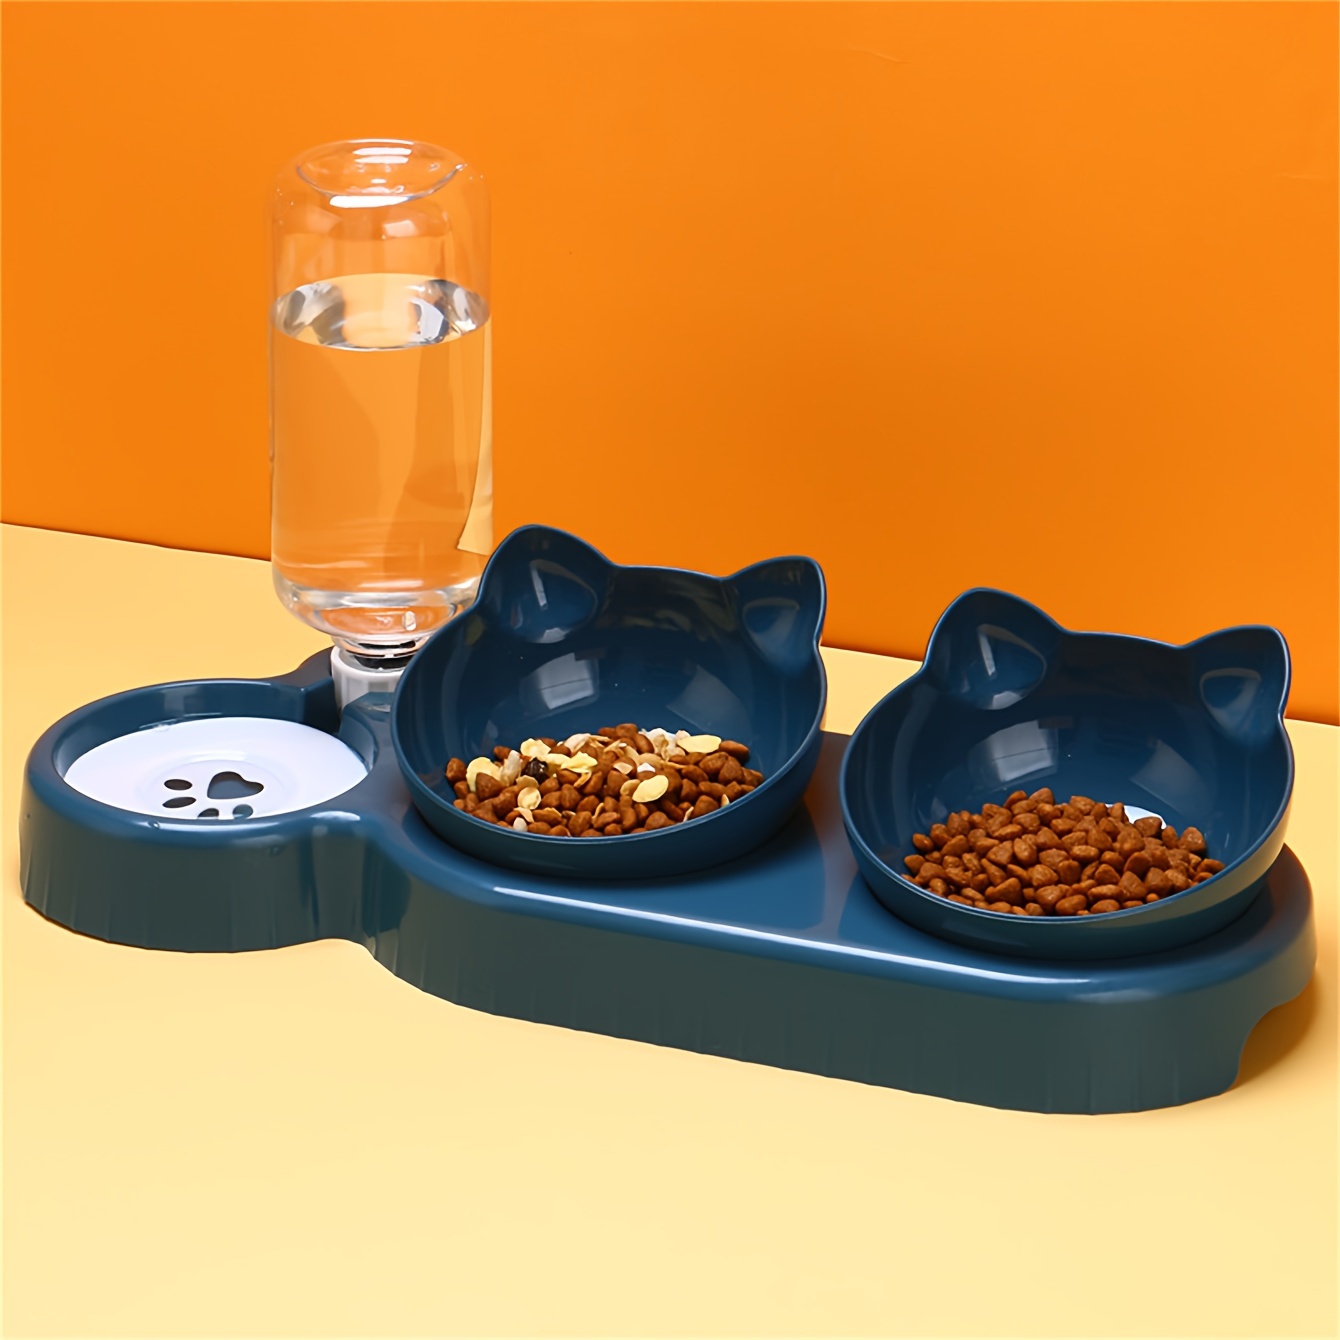 

Plastic Cat Bowls, Double Bowl Feeder For Food And Water, Easy Clean Split Design, Suitable For Cats And Small Dogs